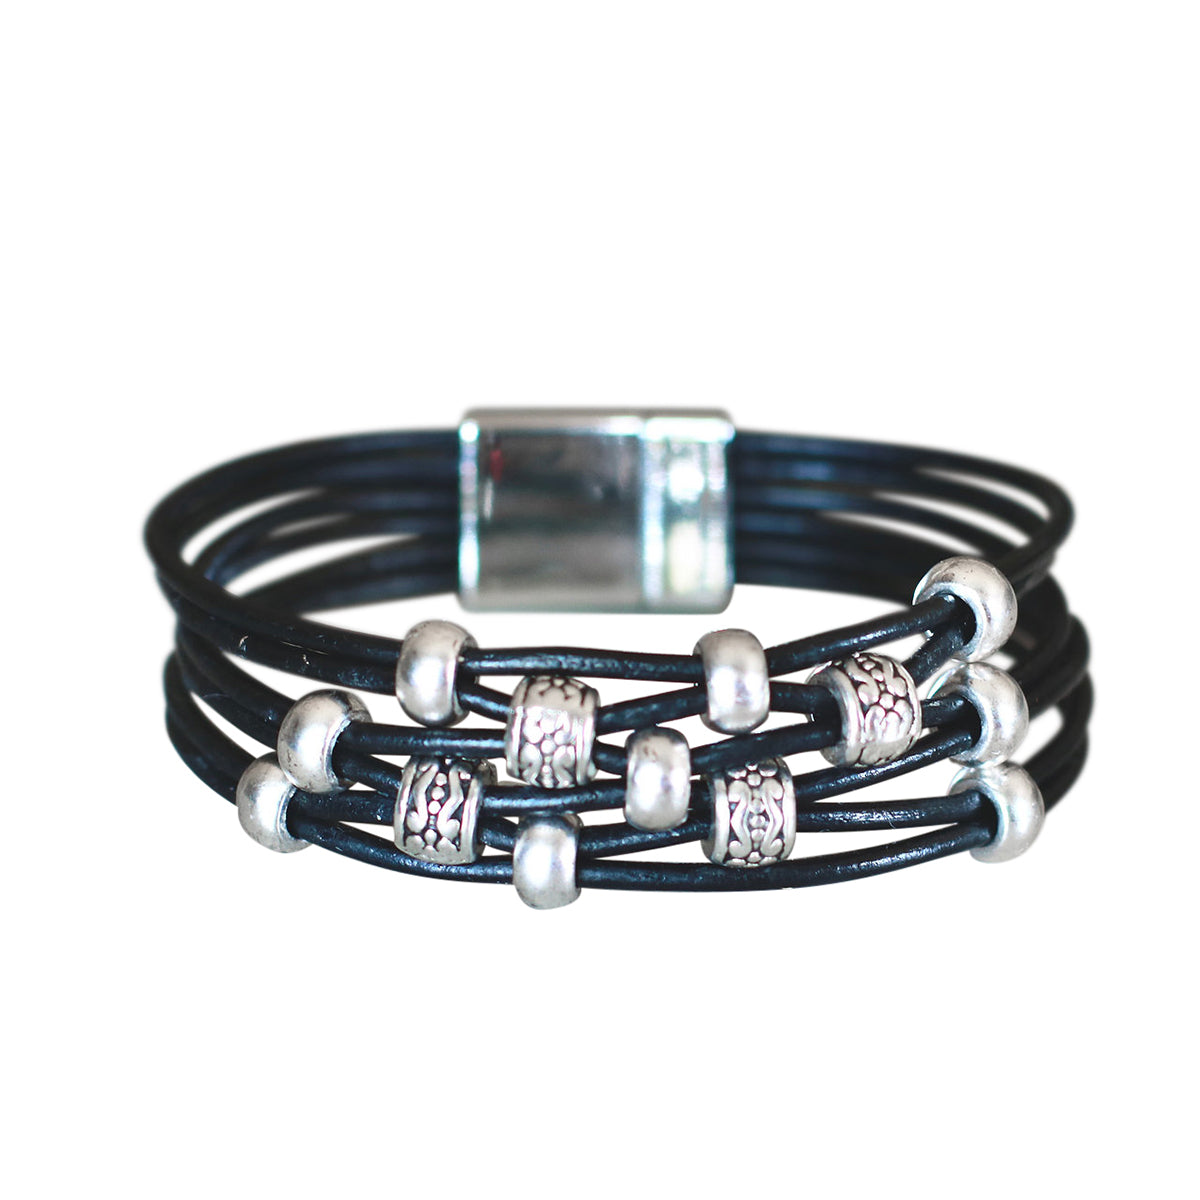 Butler Hill Nantucket bracelet black with engraved pewter beads and clasp on a white background.